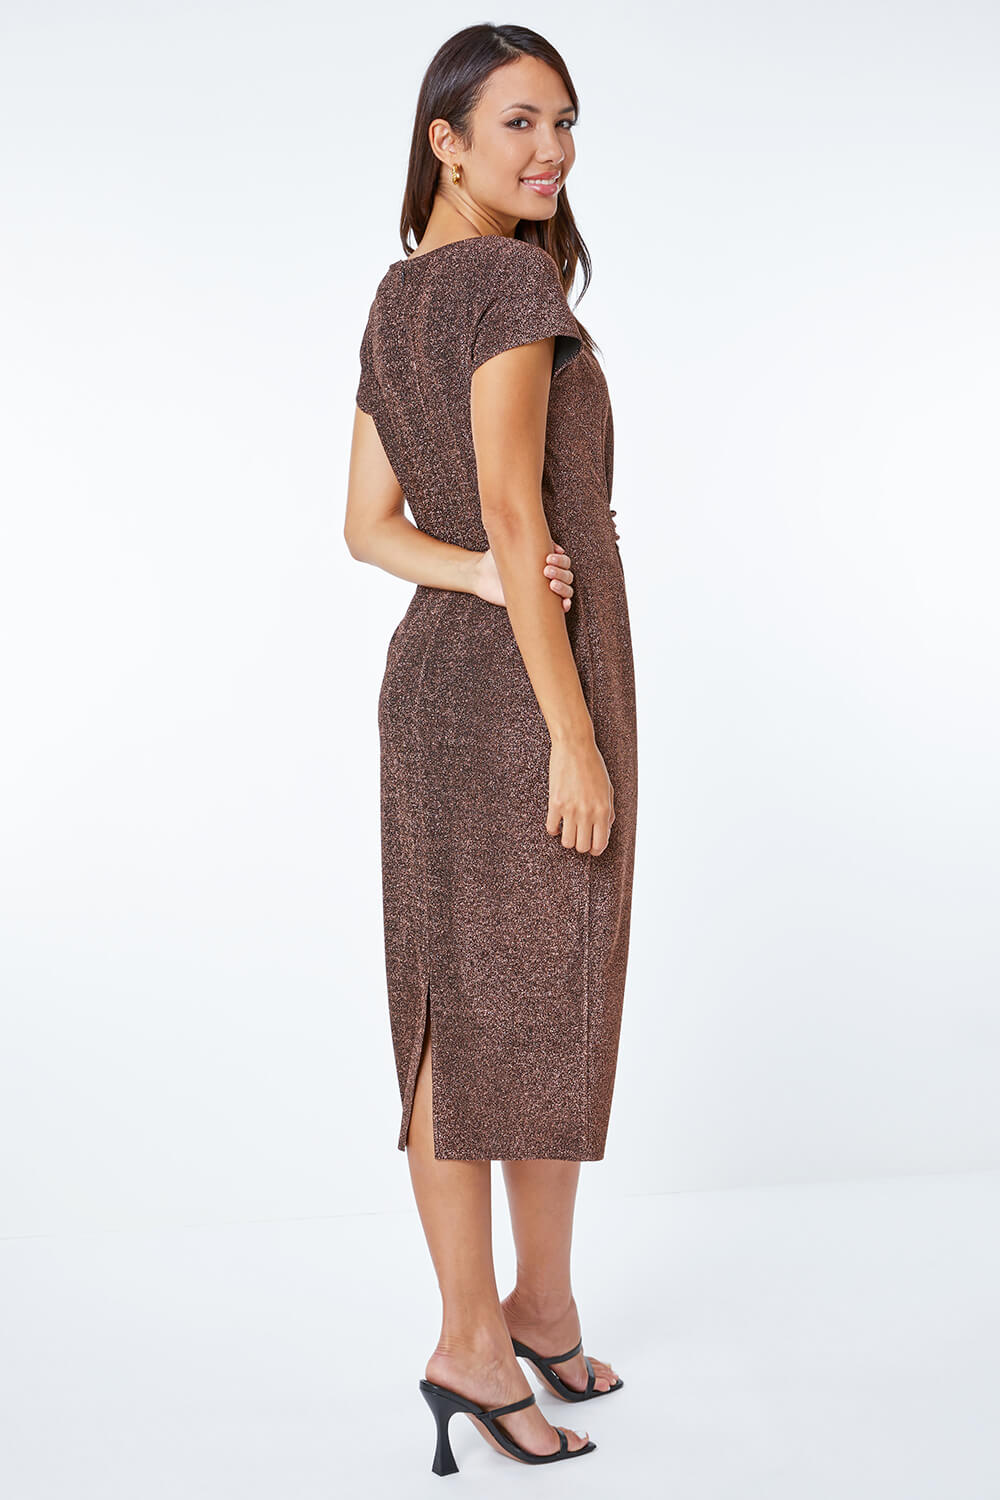 Copper Metallic Pleat Detail Ruched Midi Dress, Image 3 of 5